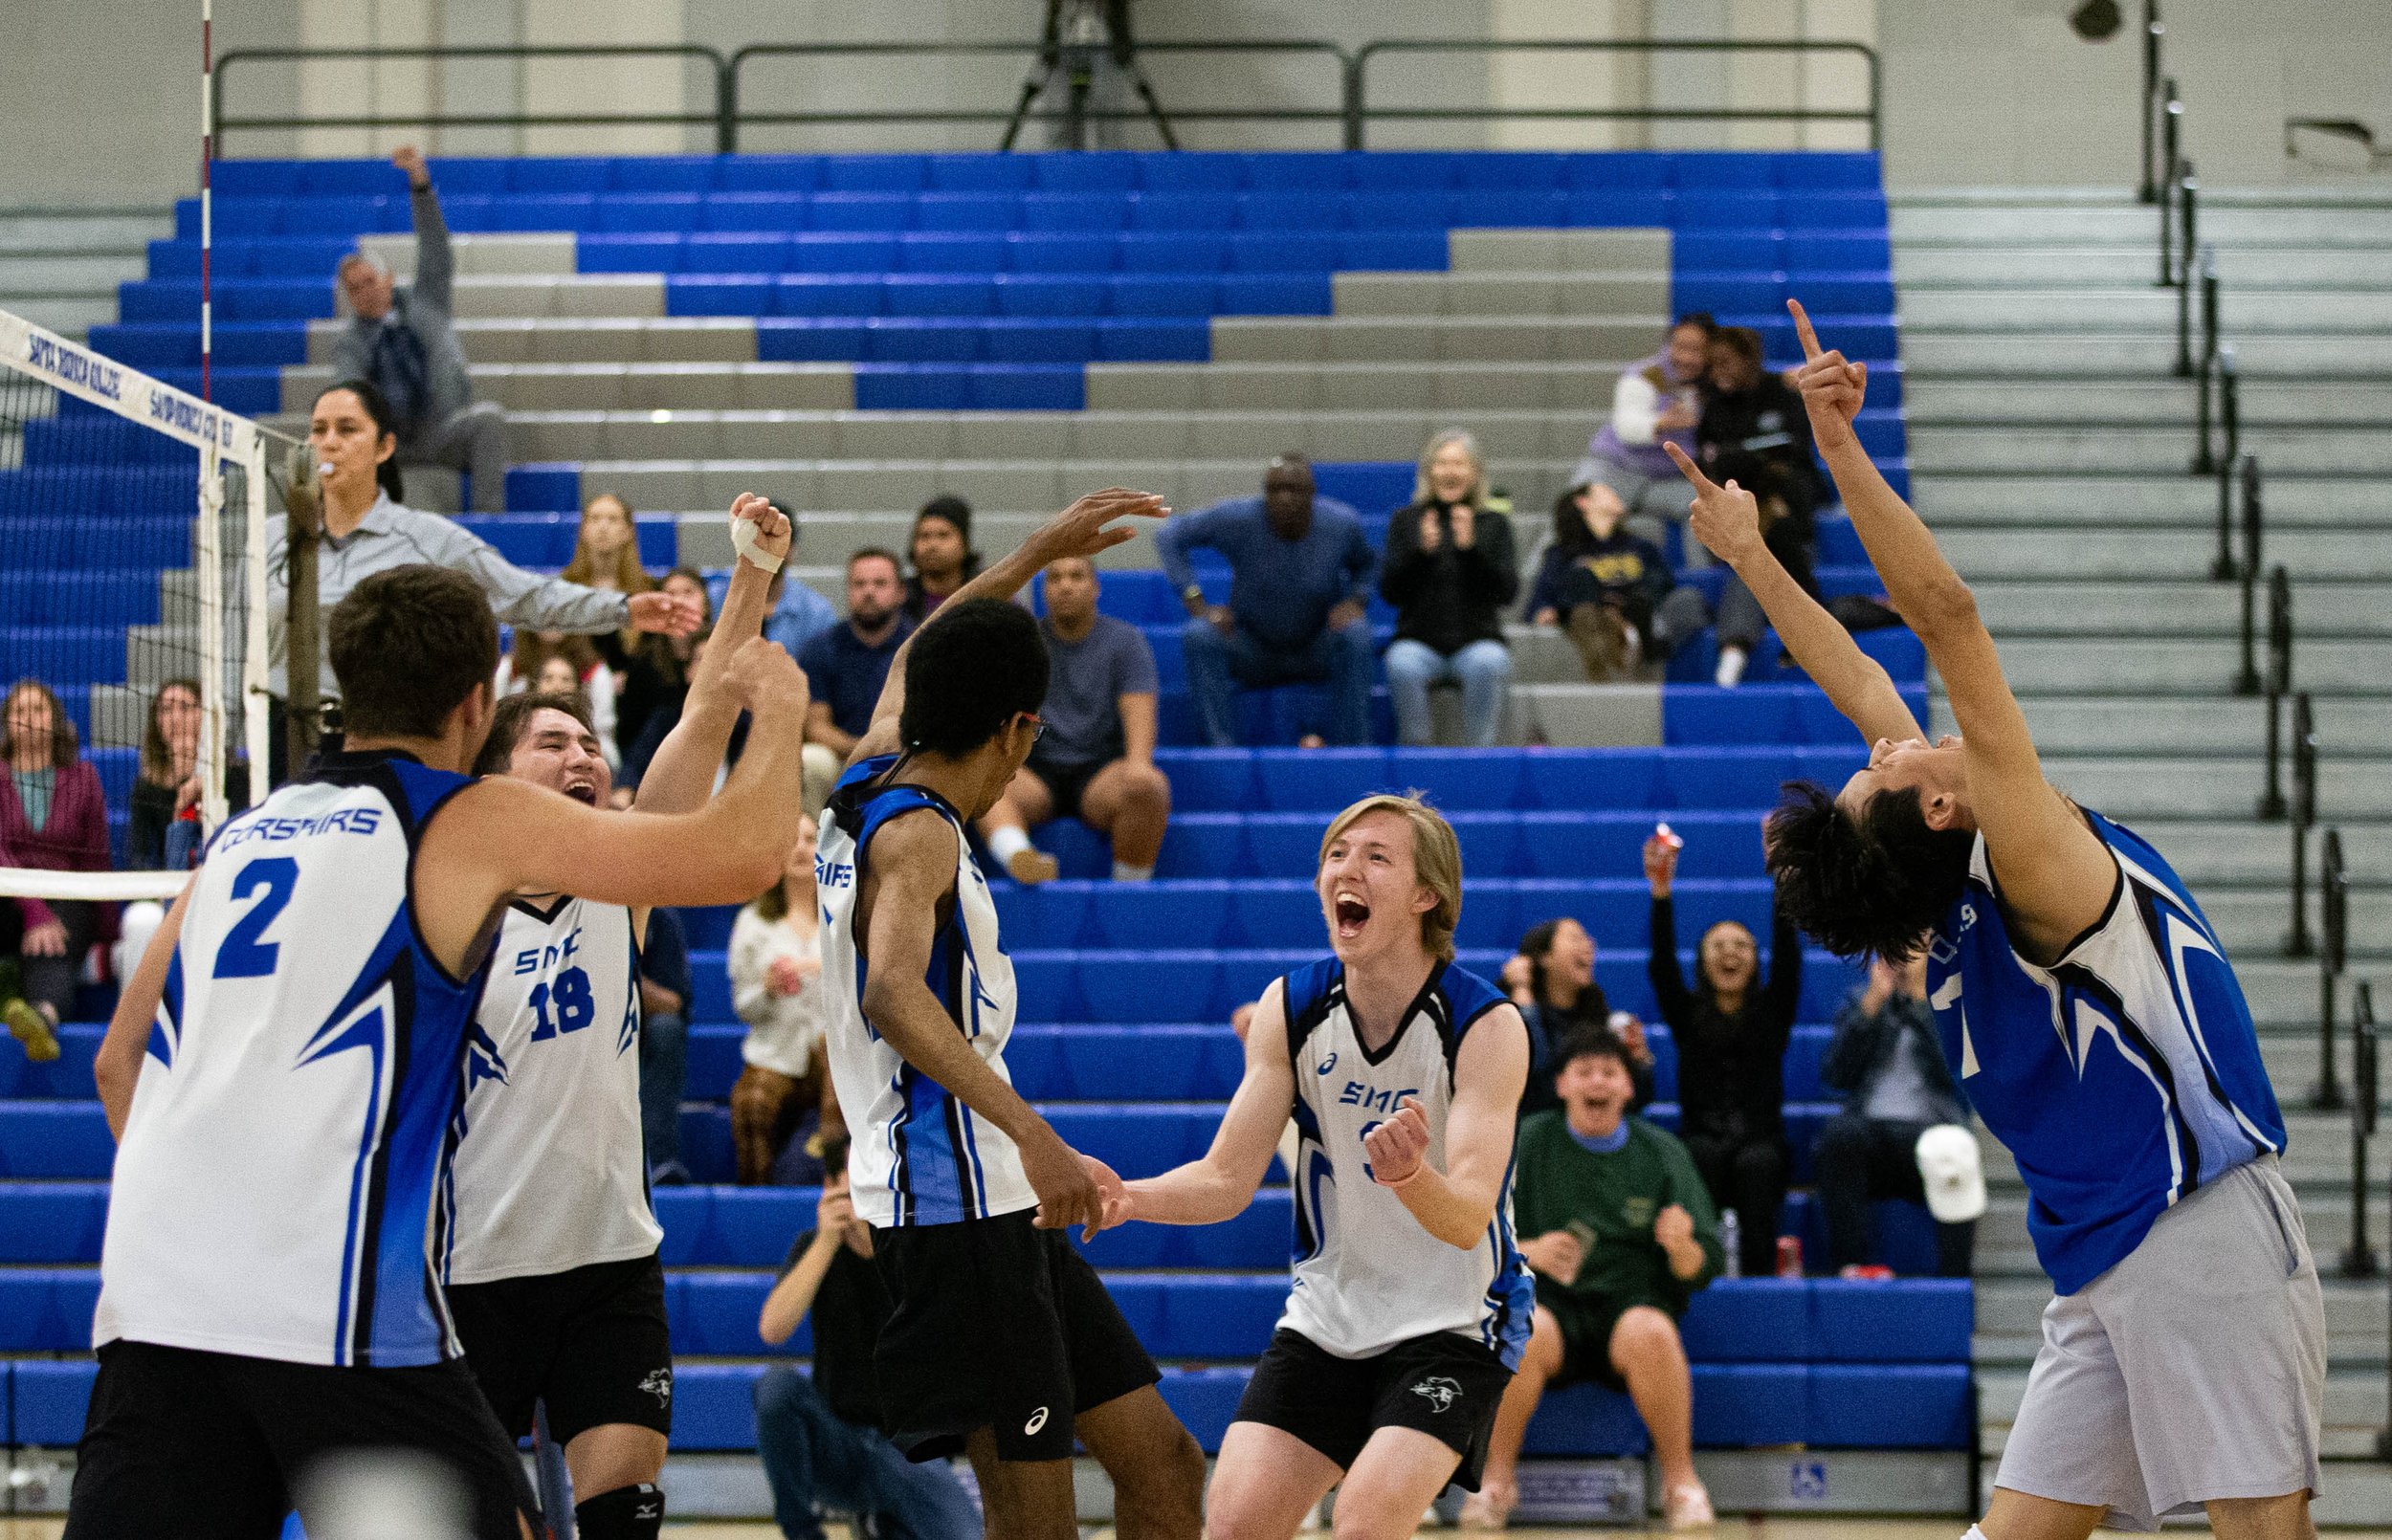  Santa Monica College Corsairs celebrating after Camden Higbee(3) saved the ball and allowed the Corsairs to gain a point against thr Santa Barbara Vaqueros on Fri. March 24 in the Corsair Gym at Santa Monica, Calif. (Danilo Perez | The Corsair) 